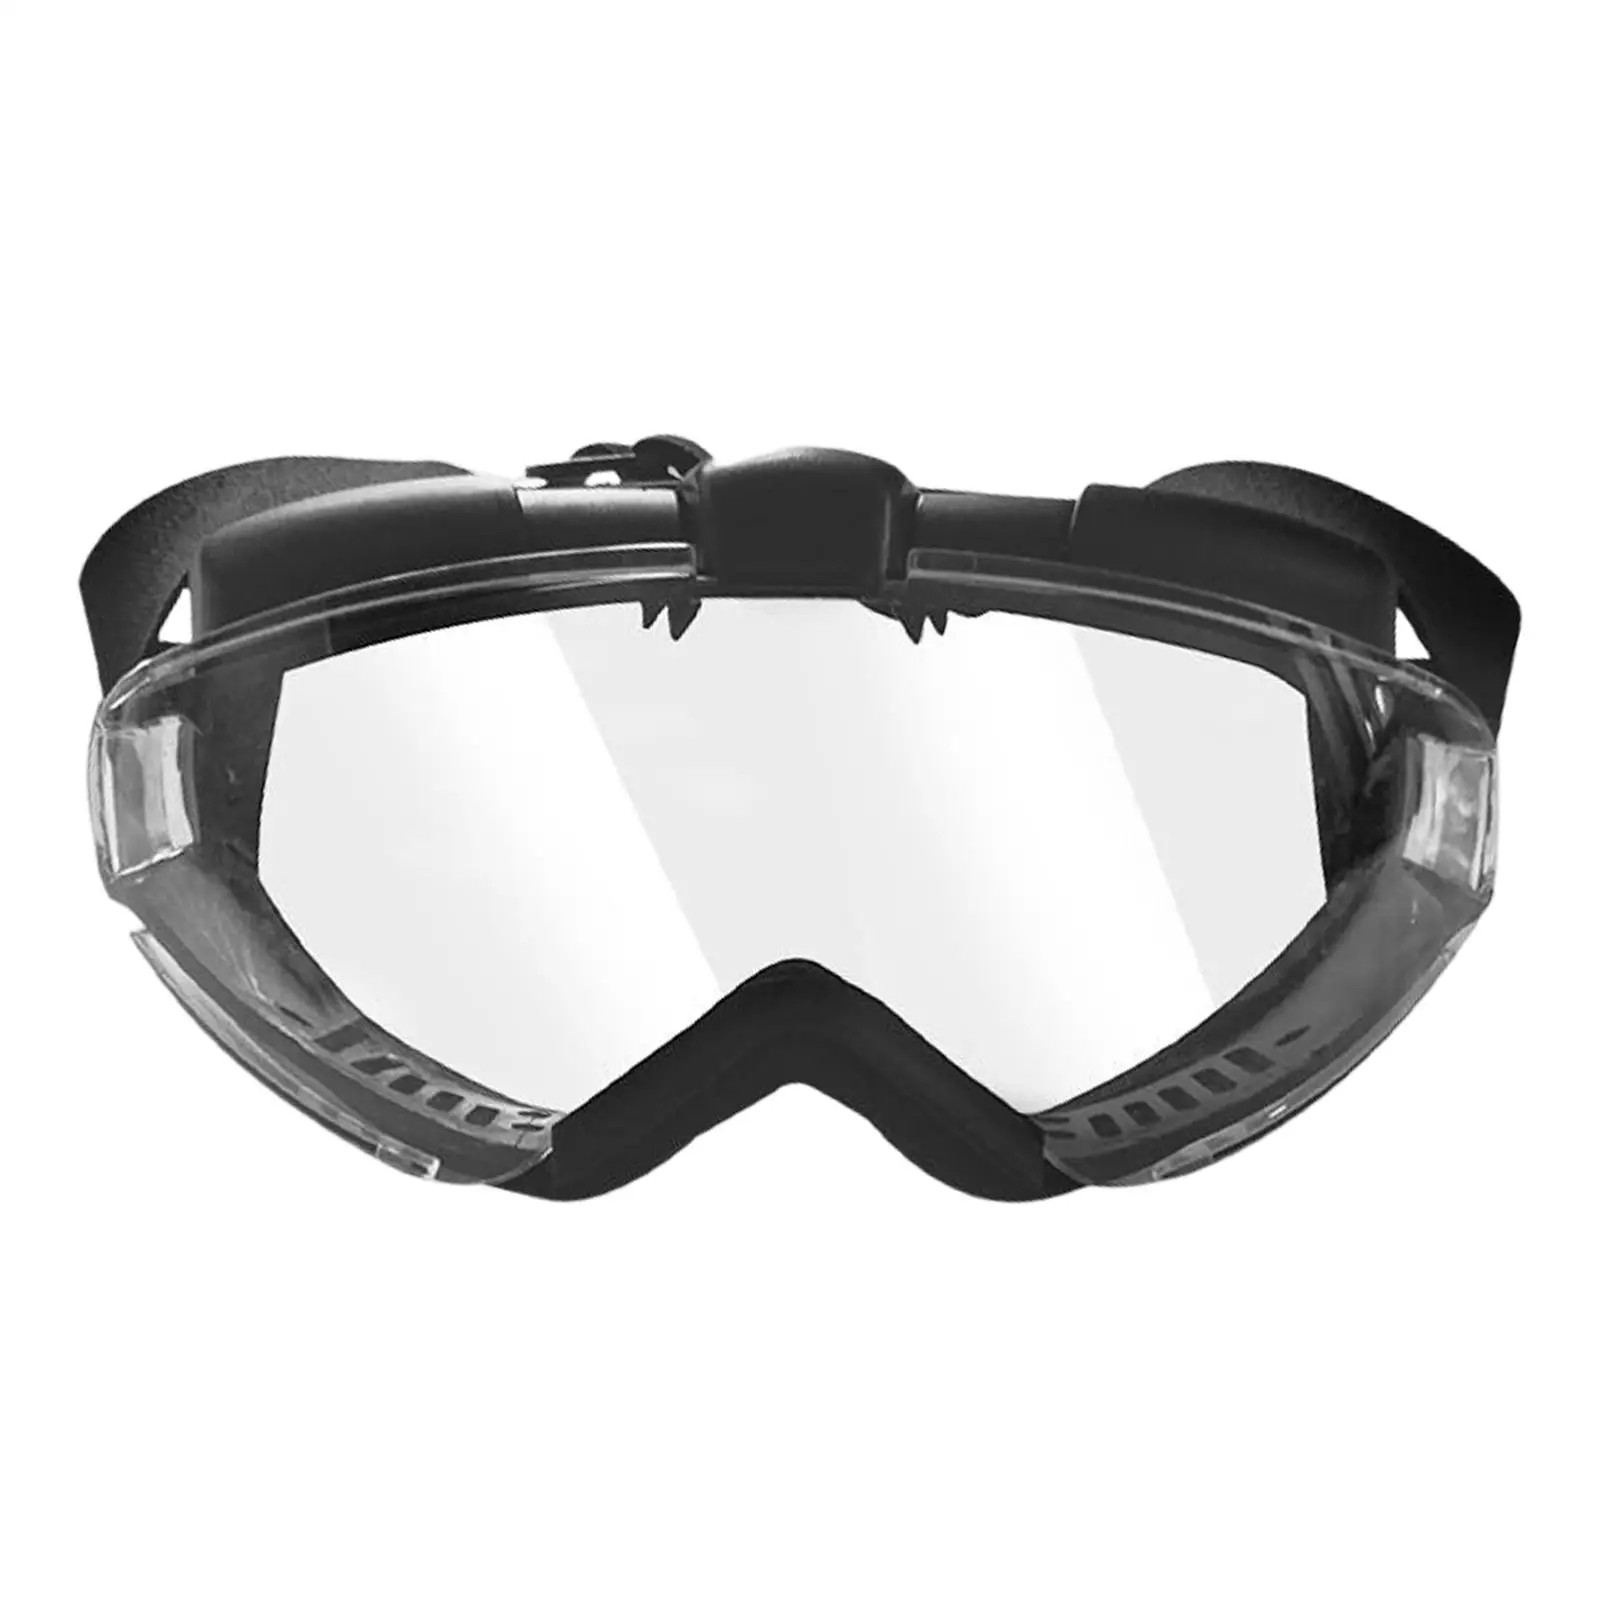 Outdoor Glasses Goggles Unisex Protection Dustproof for Riding Cycling Hiking Fishing